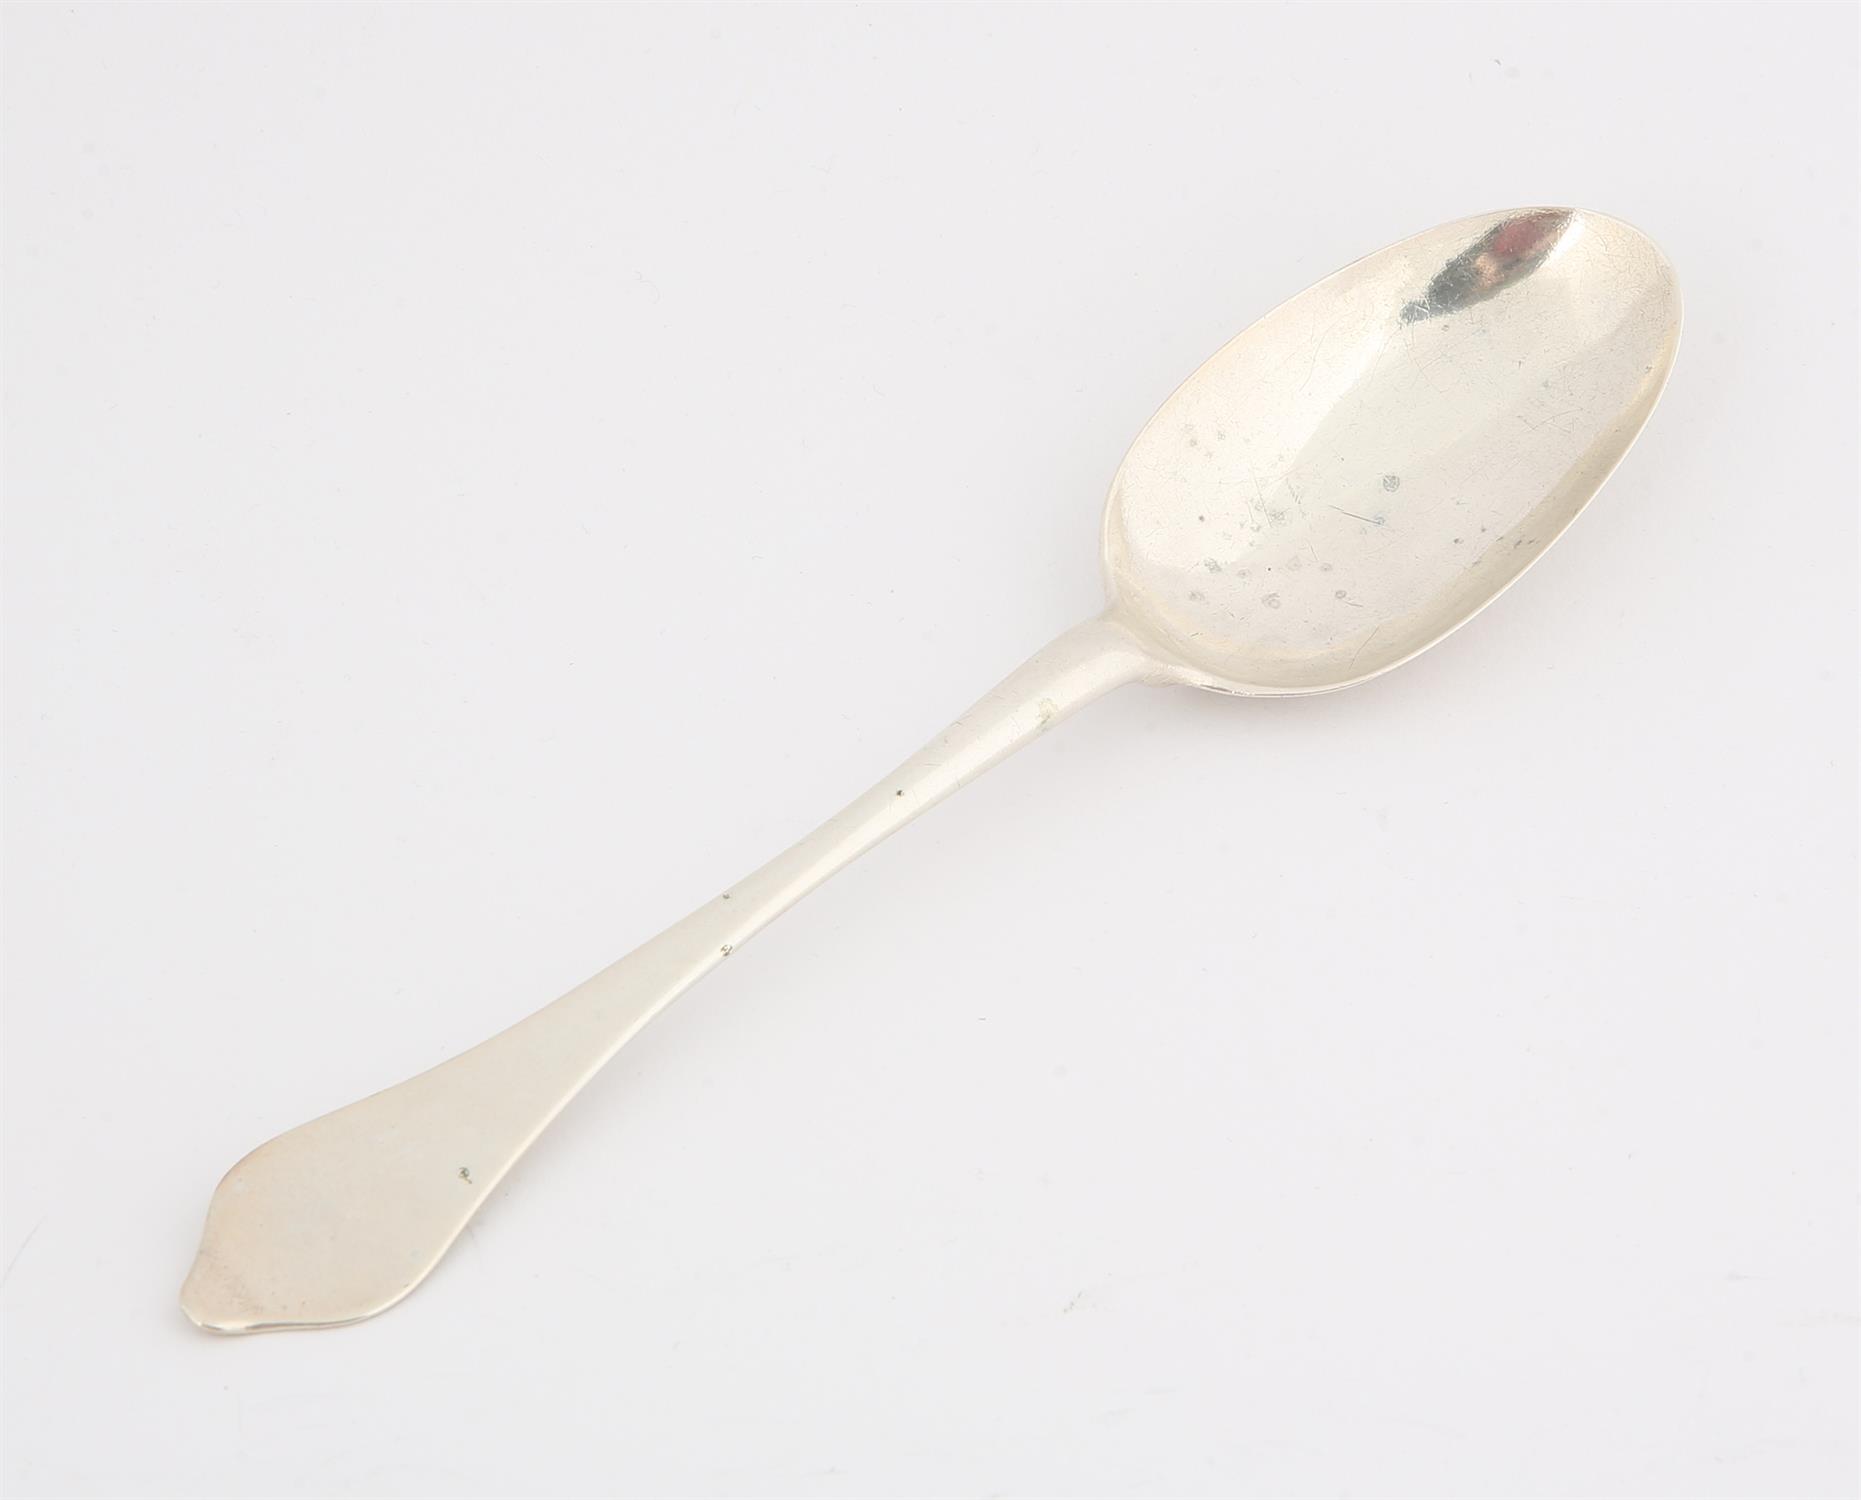 Silver dog nose spoon, marks rubbed but probably circa 1700 SILVER COLLECTION OF SIR RAY TINDLE - Image 3 of 4